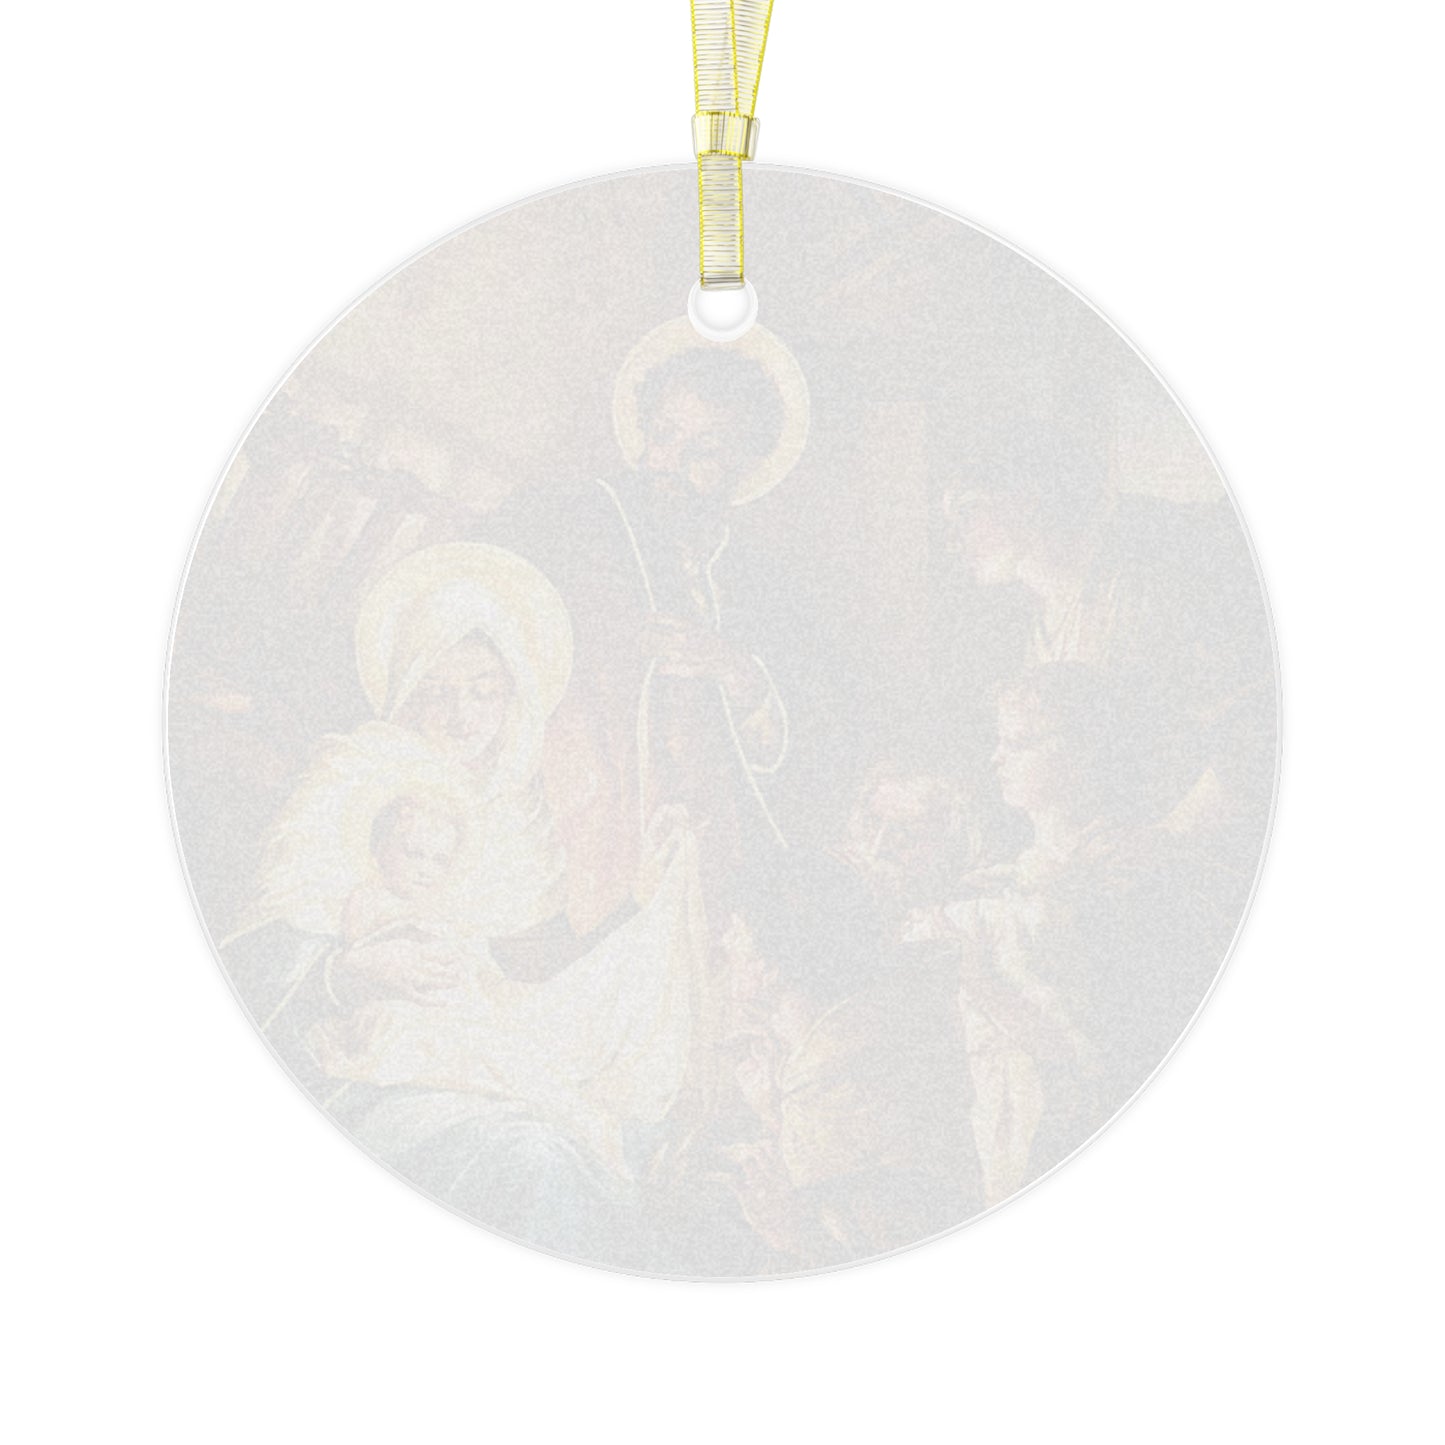 Nativity Christmas Ornament: Jesus, Mary, Joseph, Tree trimming, Holiday gift, Religious ornament, Meaningful Christmas gift